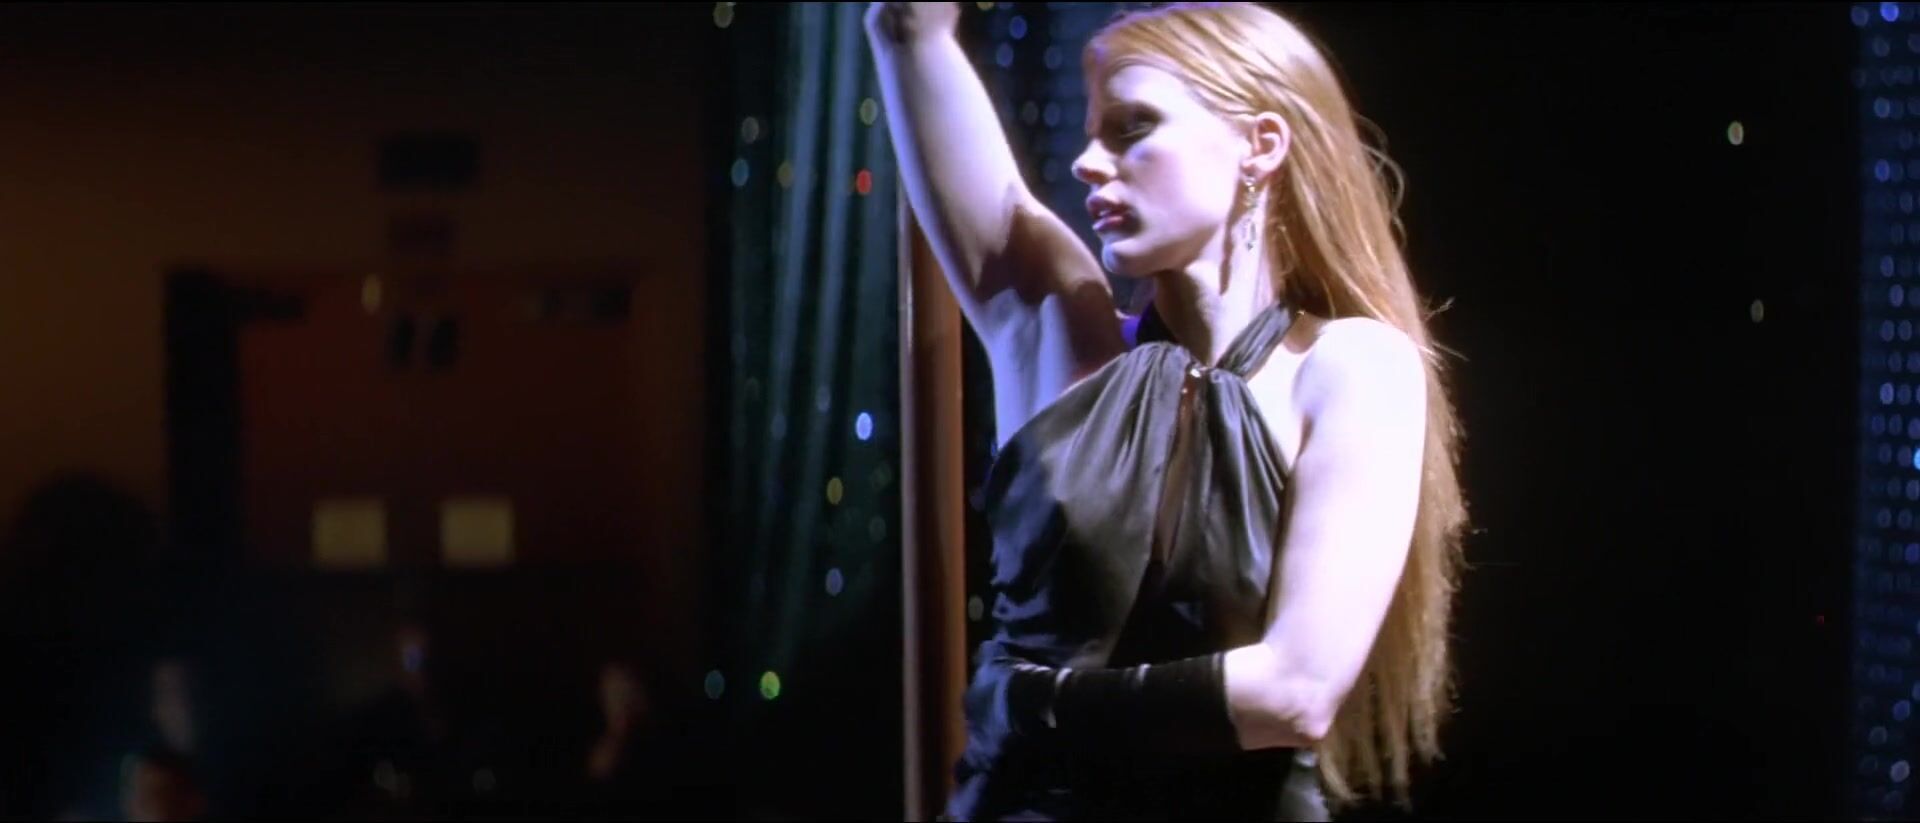 Cartoonza Jessica Chastain moves around pole and pulls dress down showing boobies in Jolene (2008) Alanah Rae